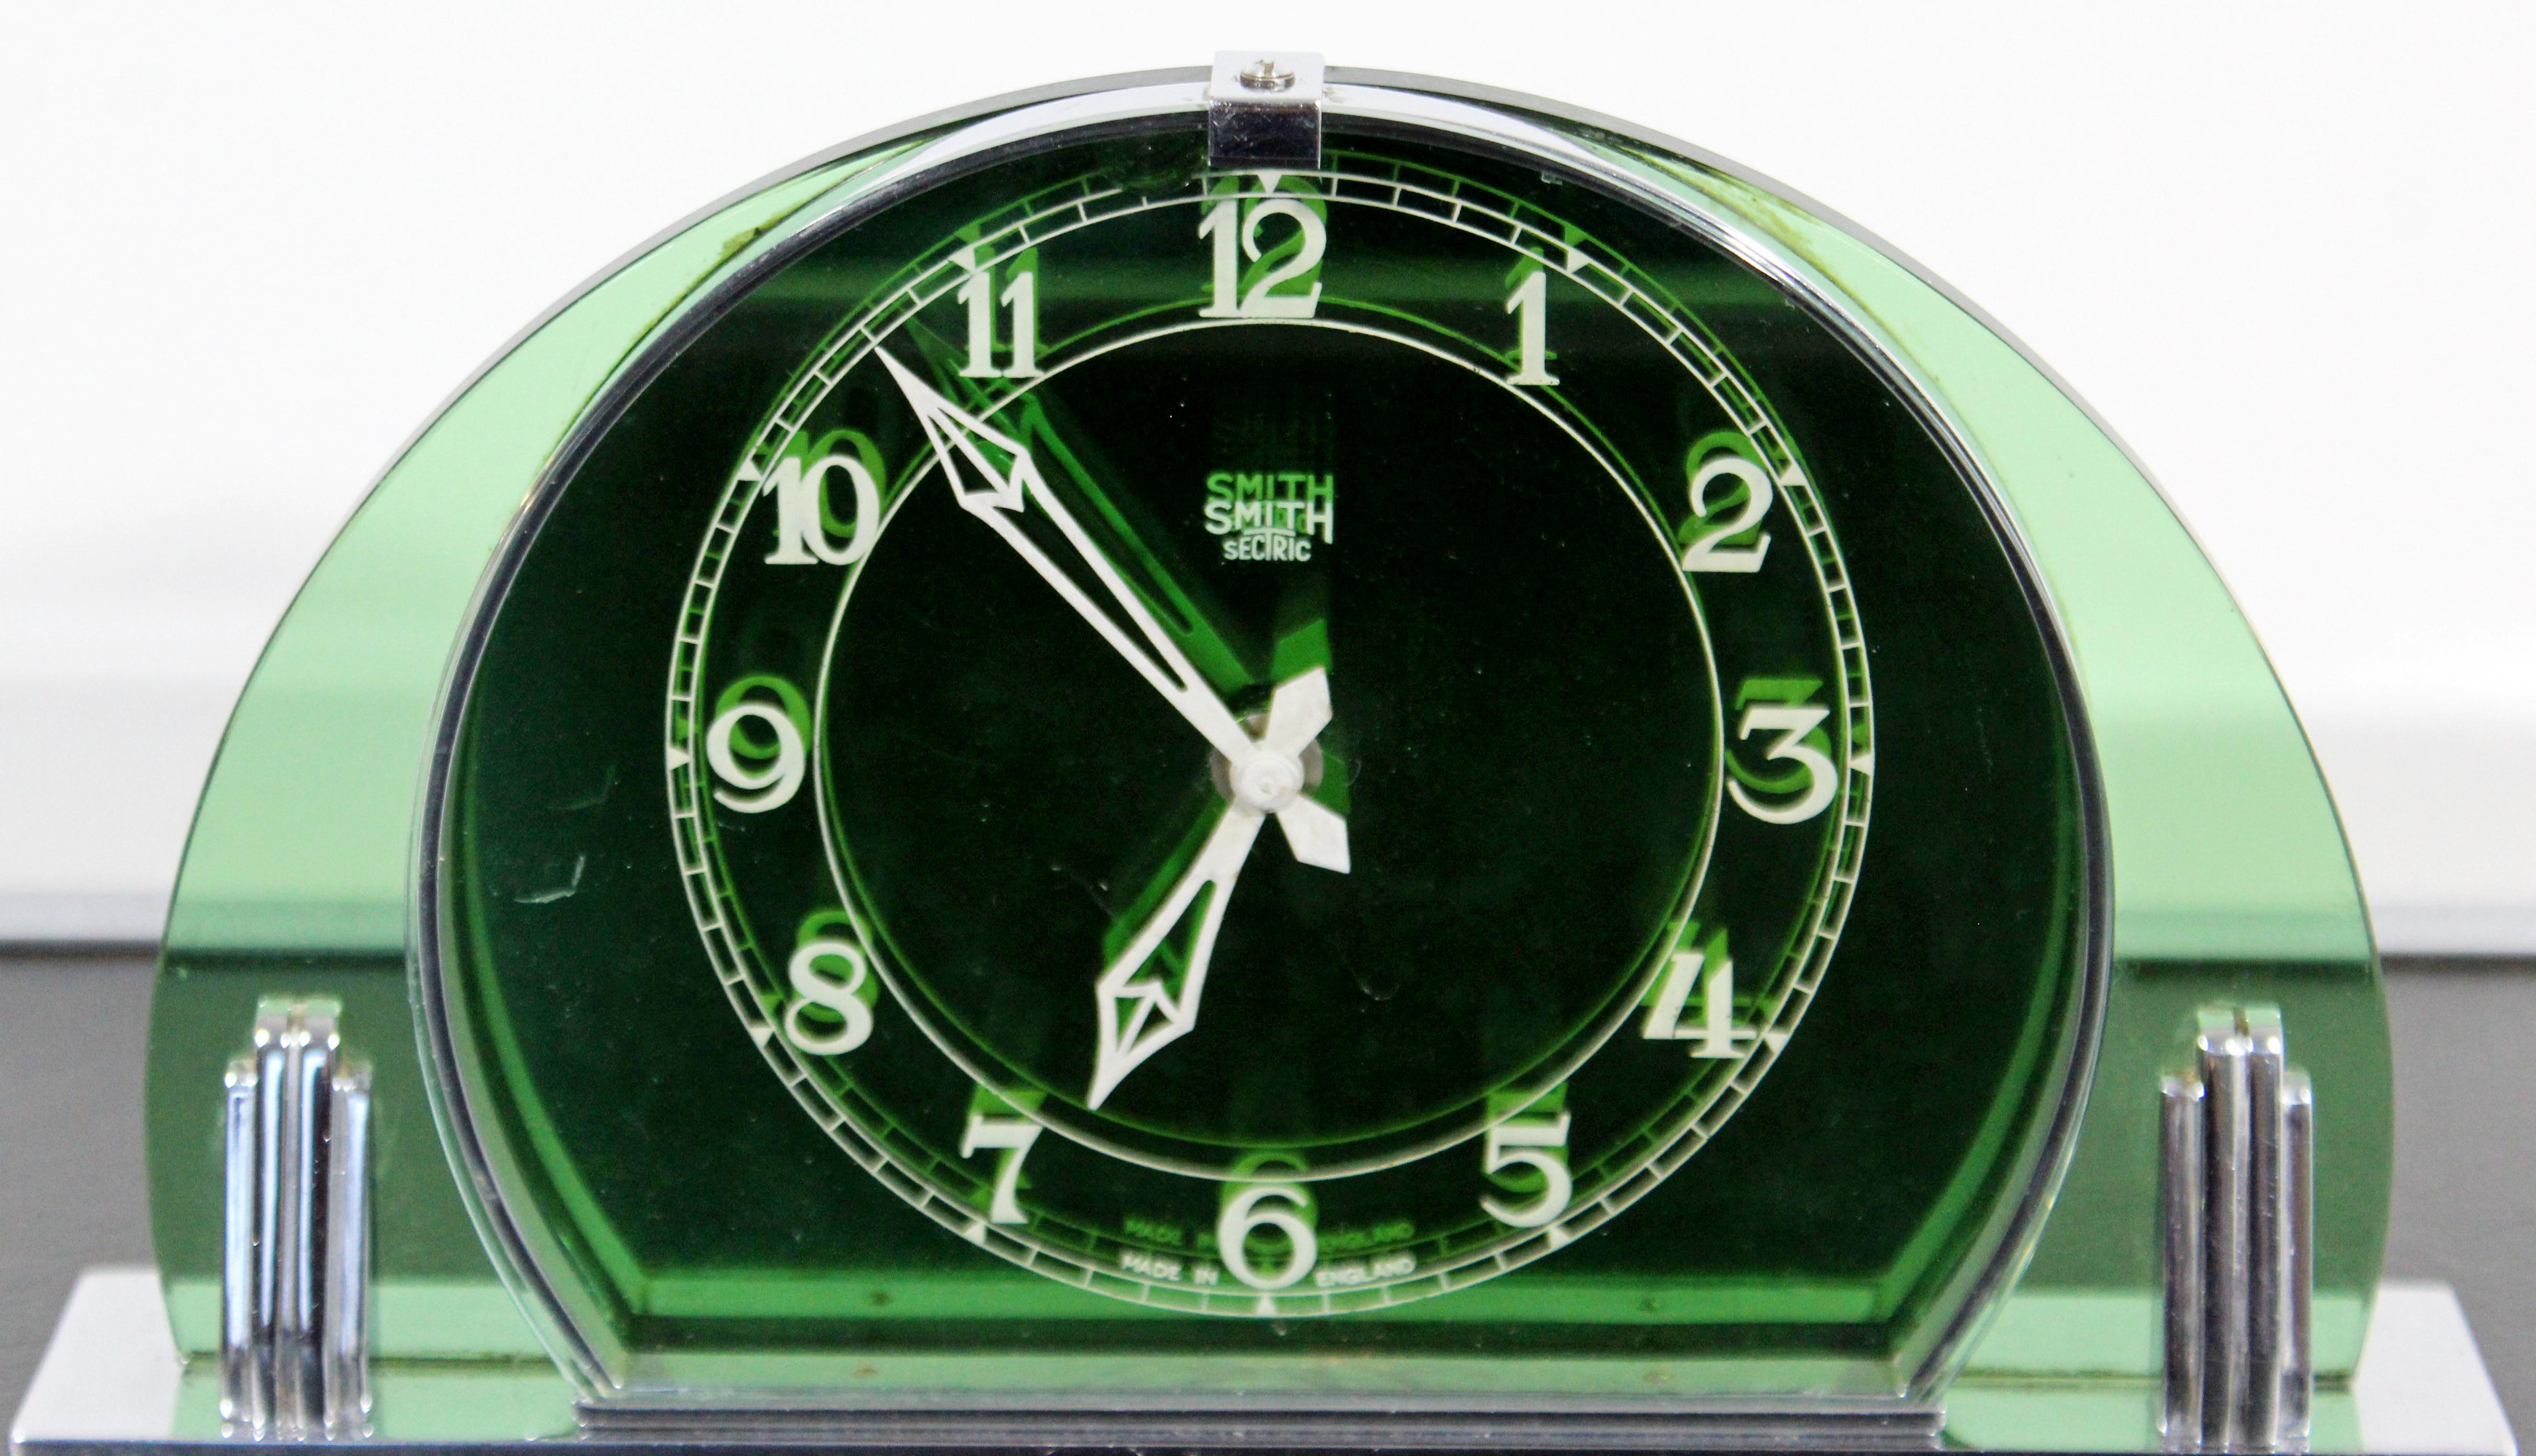 For your consideration is a gorgeous, English Deco mantel (fireplace) or shelf clock, made of green glass and chrome, by Smith Sectric. Power cord cut, currently non-functional, should be an easy fix. In excellent antique condition. The dimensions